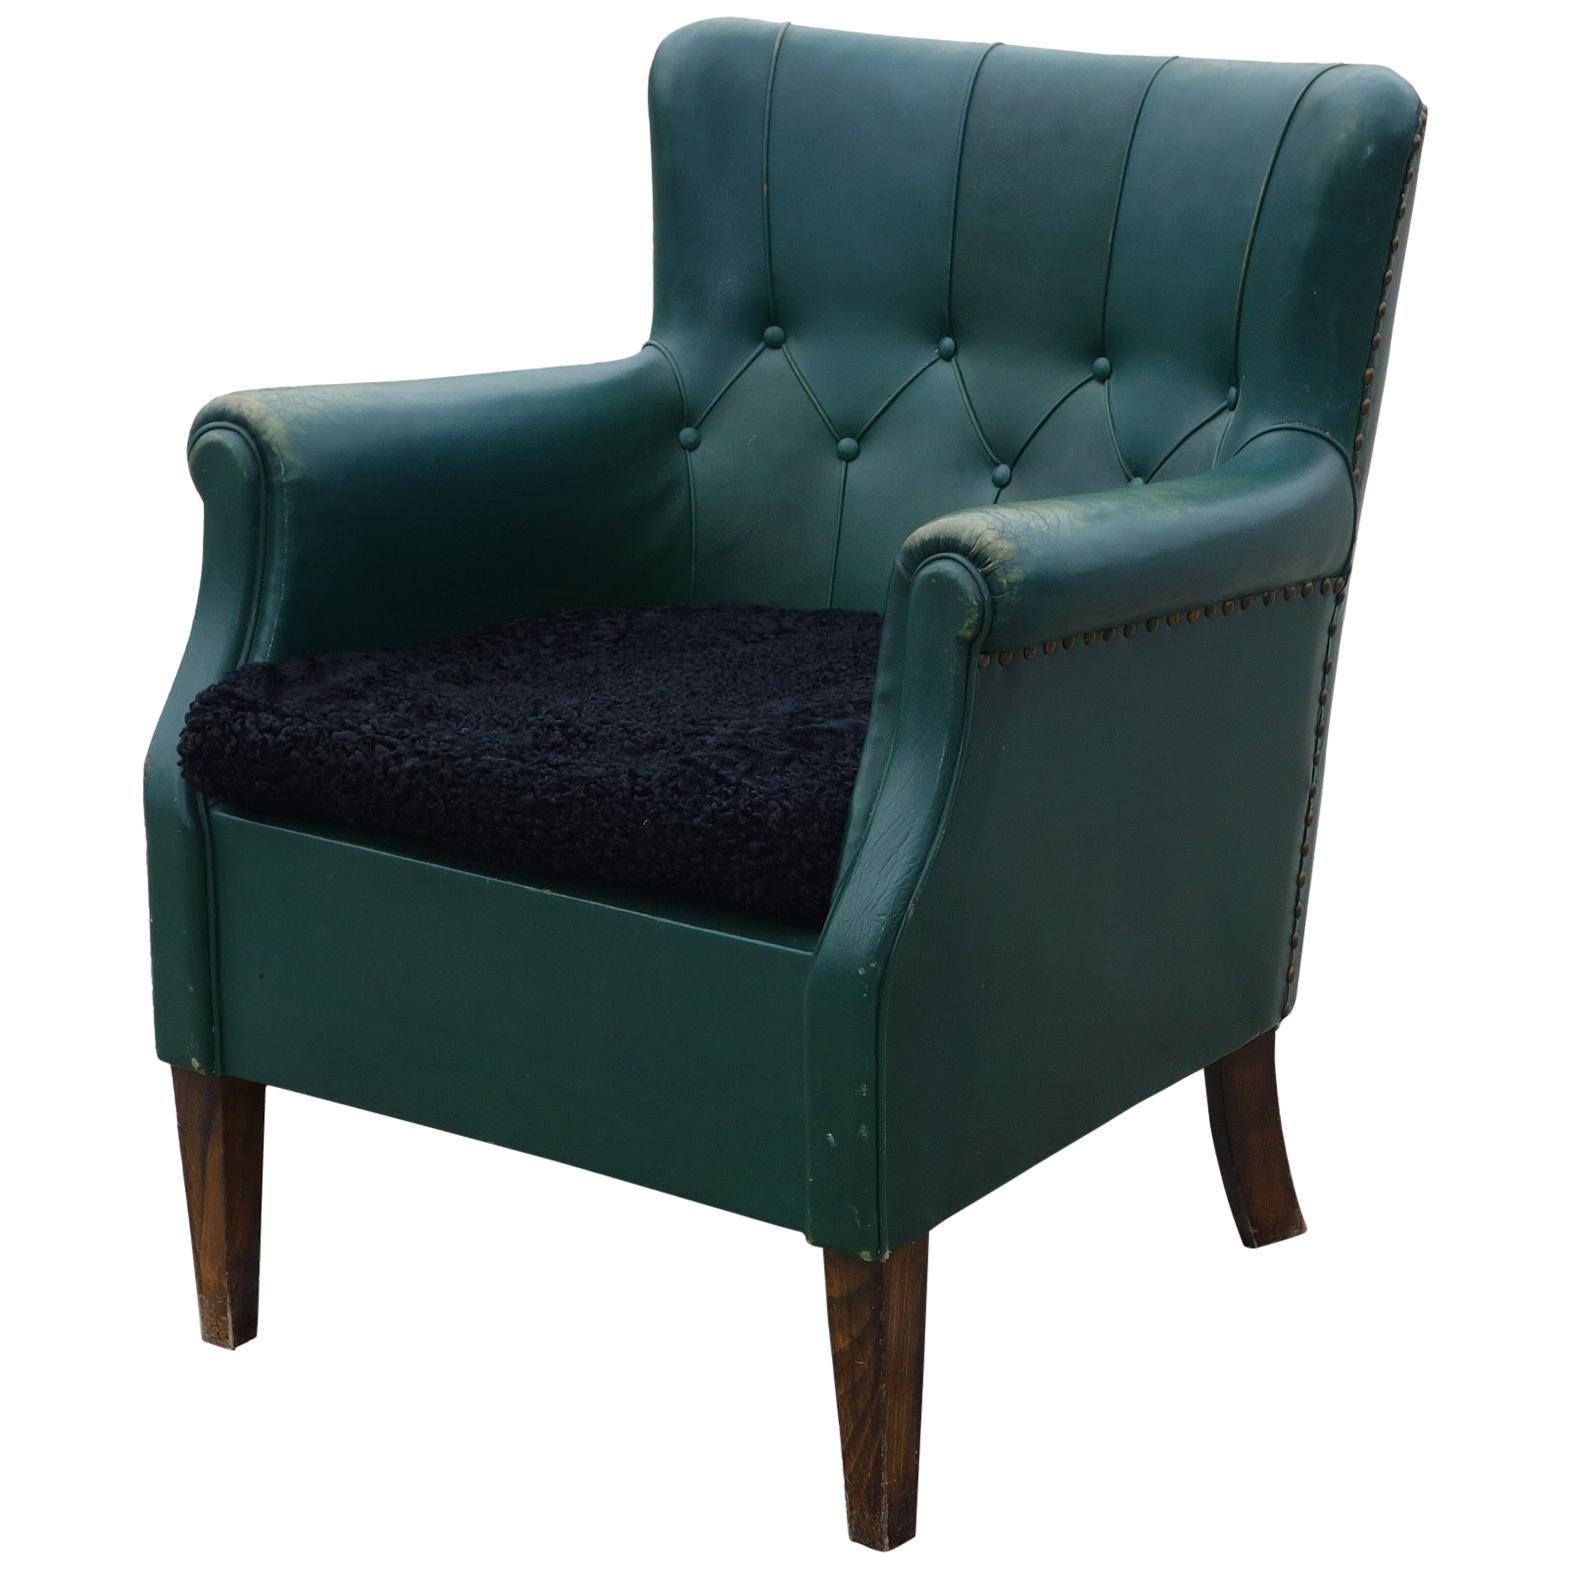 Danish 1930s Green Leather Club Chair For Sale